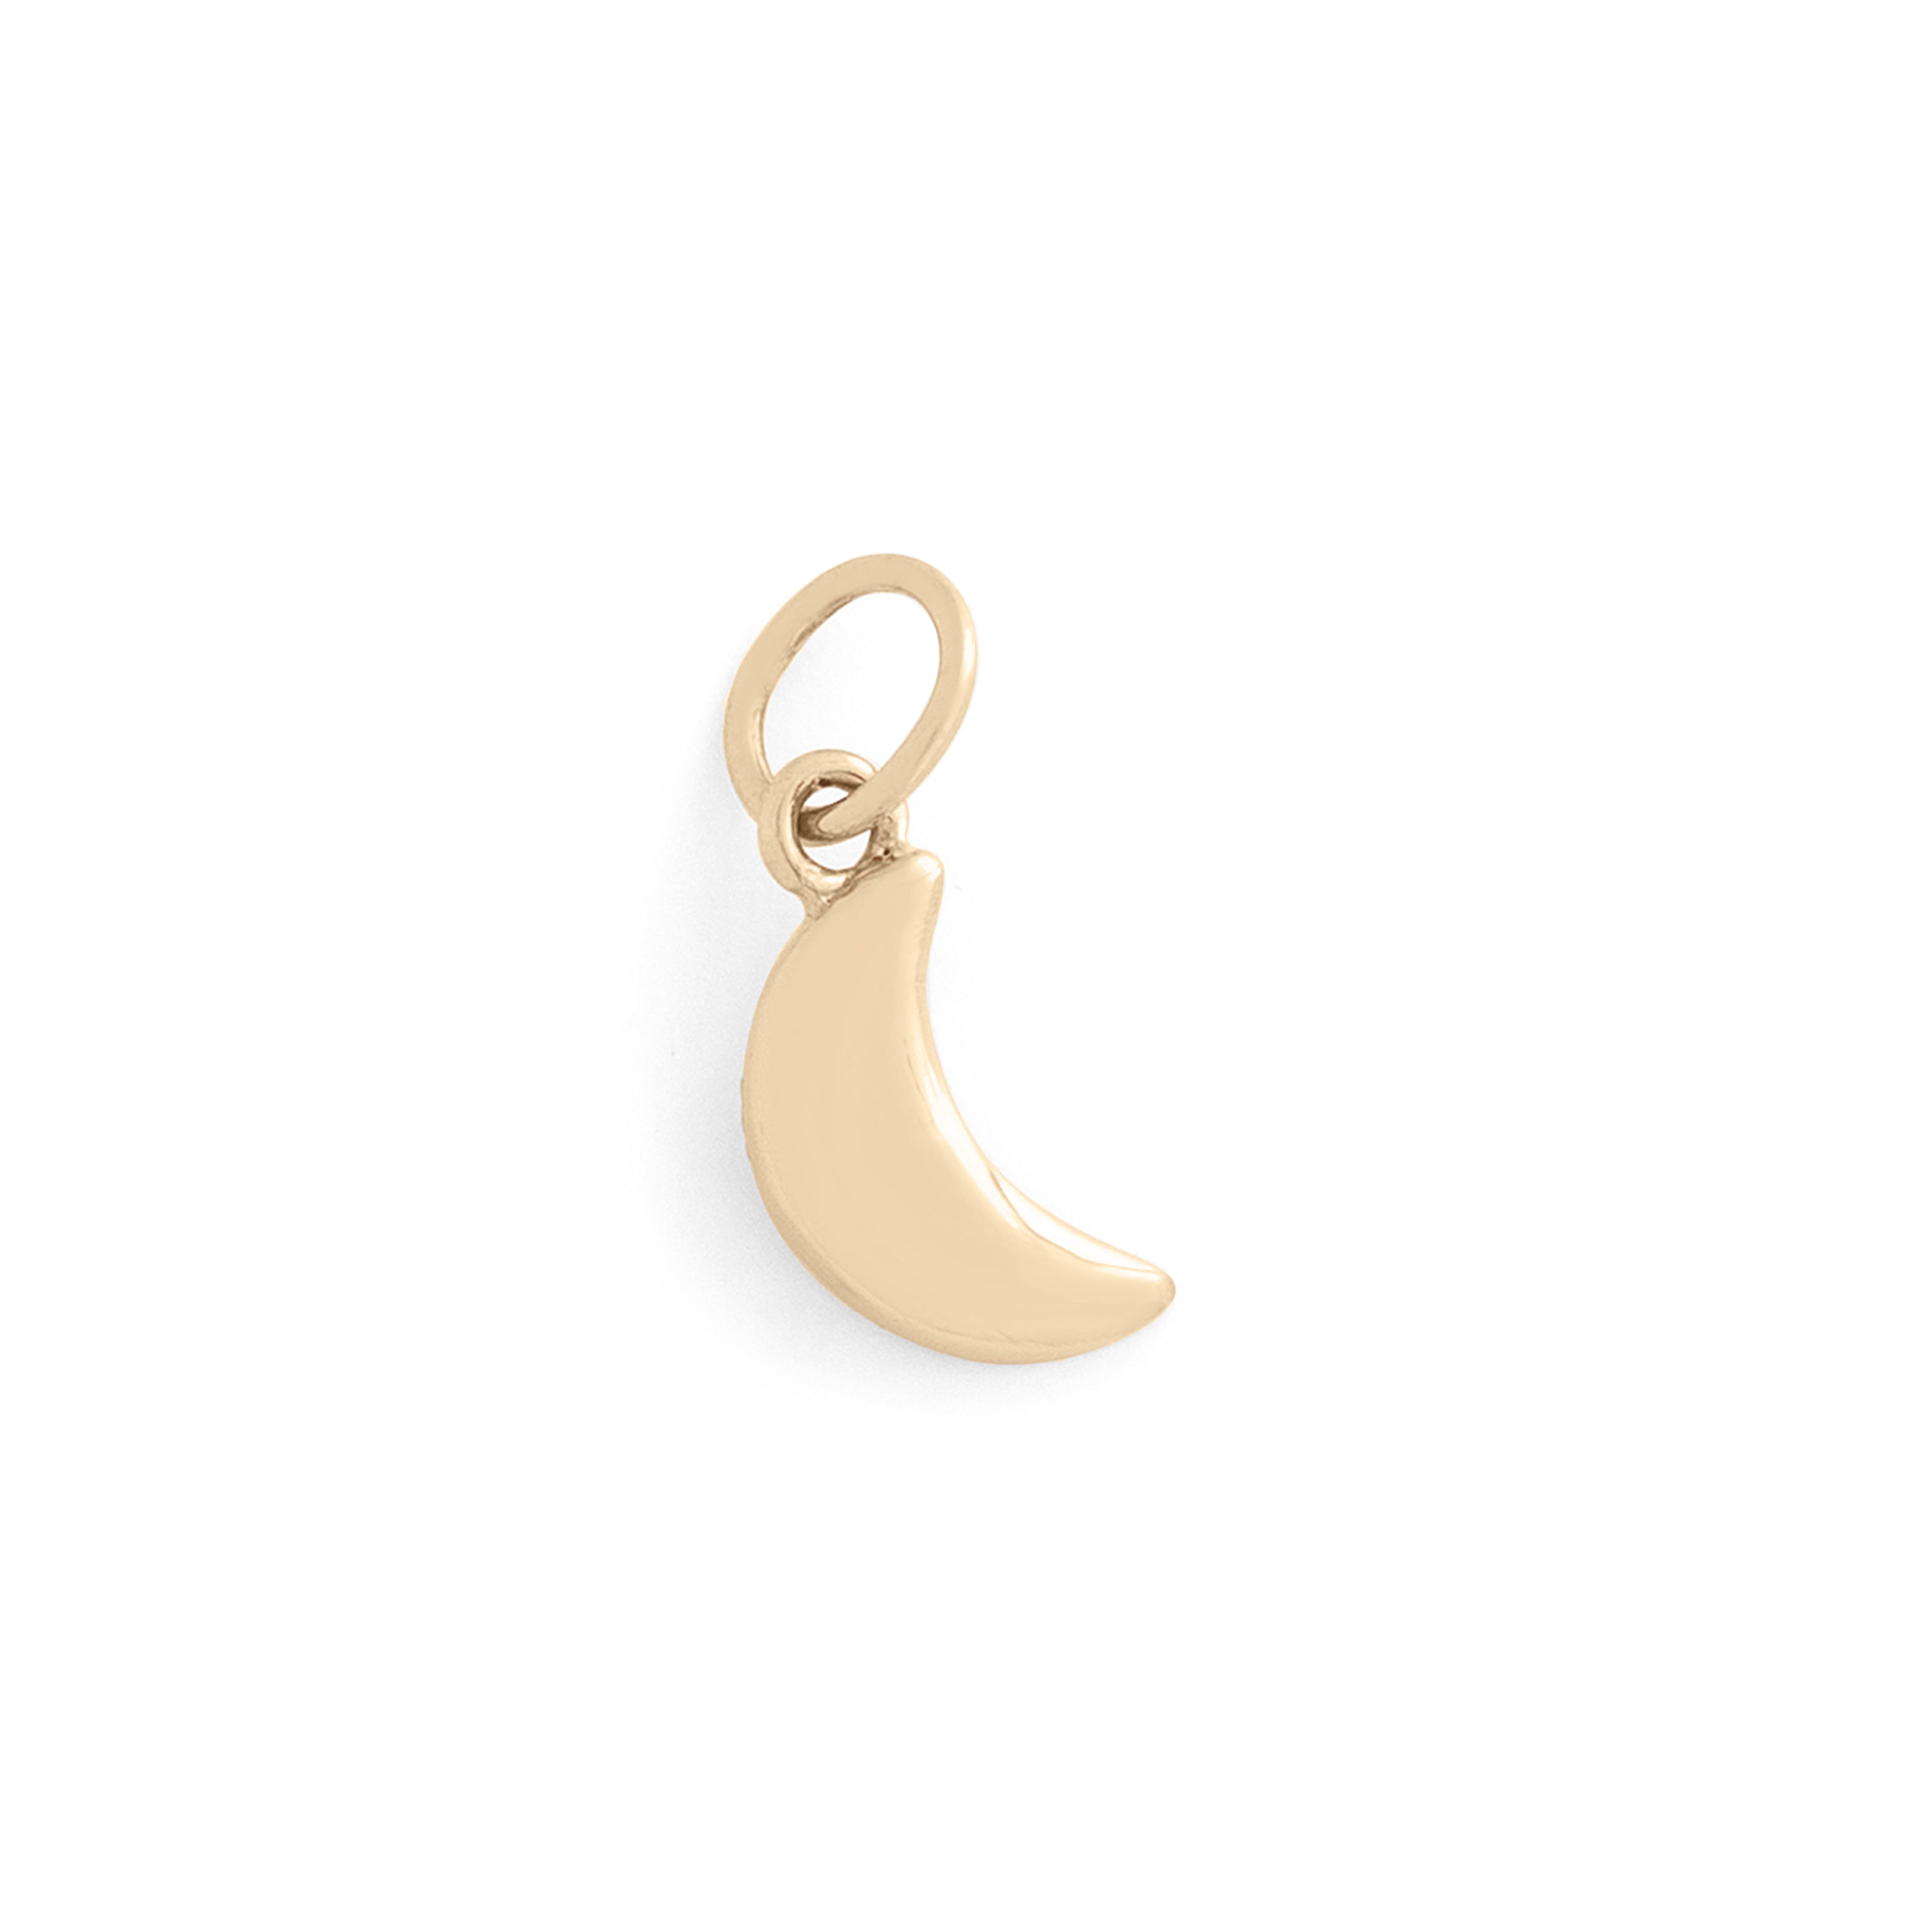 The F&B Crescent Moon Charm Necklace